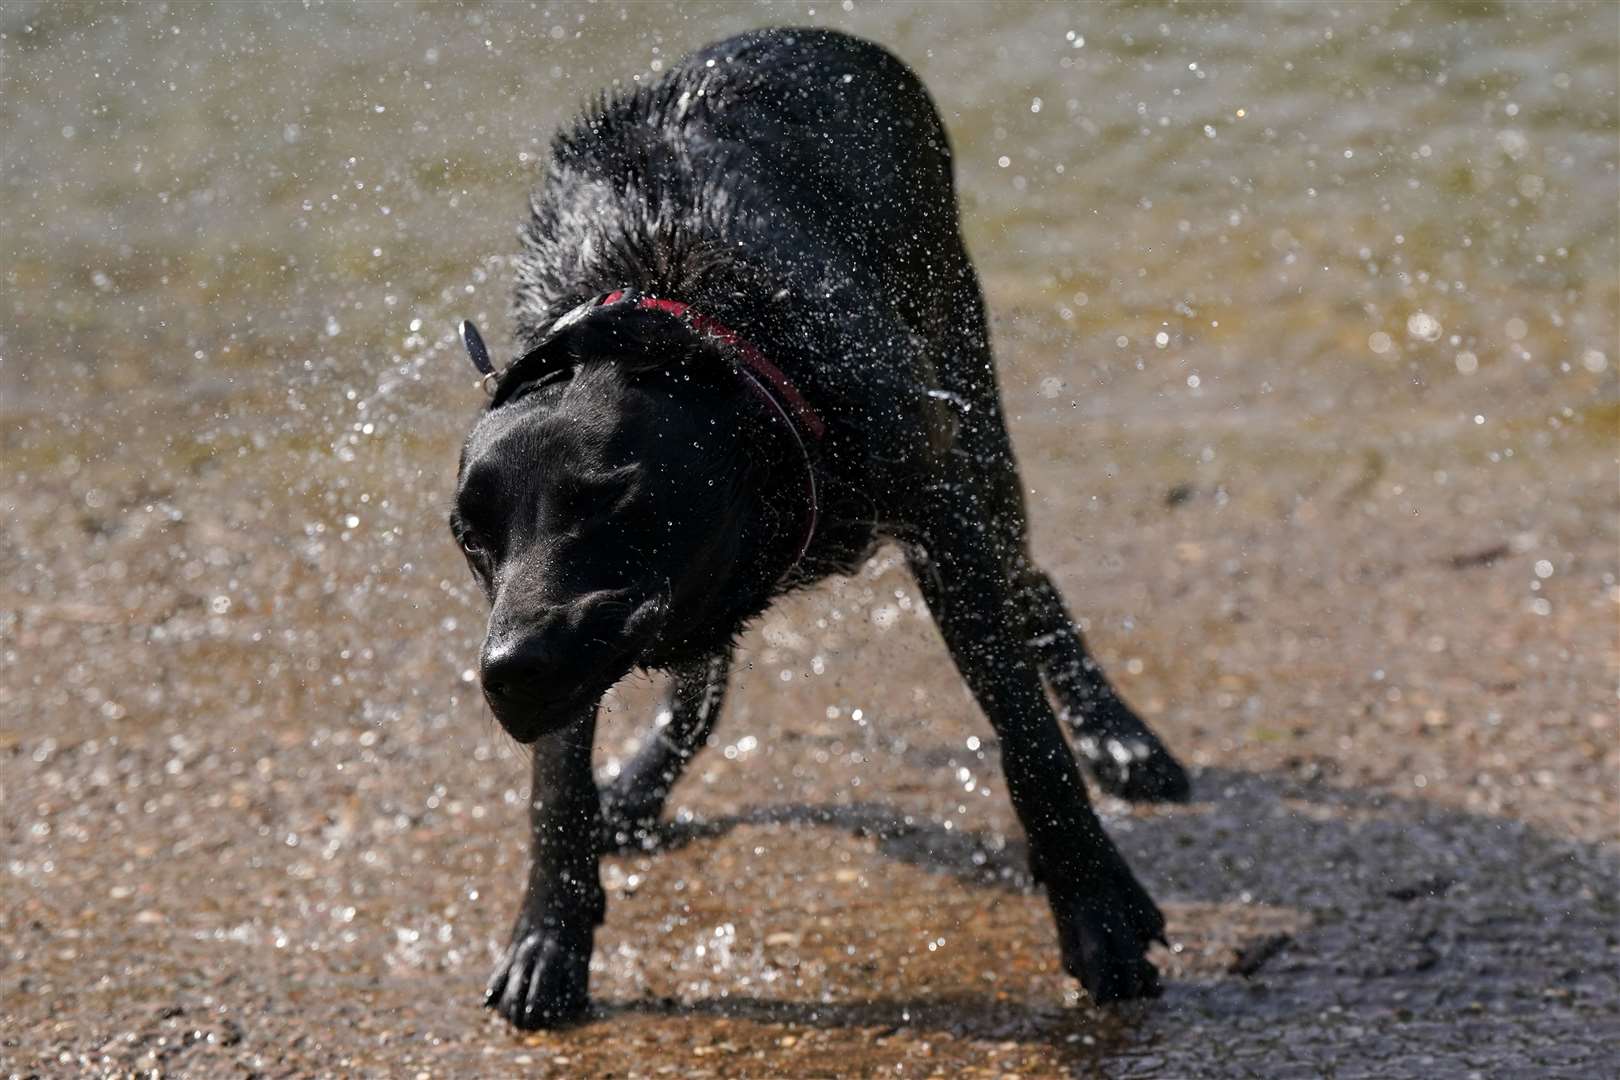 A dog shakes themselves dry after swimming in the River Avon in Warwick during the hot weather (Jacob King/PA)